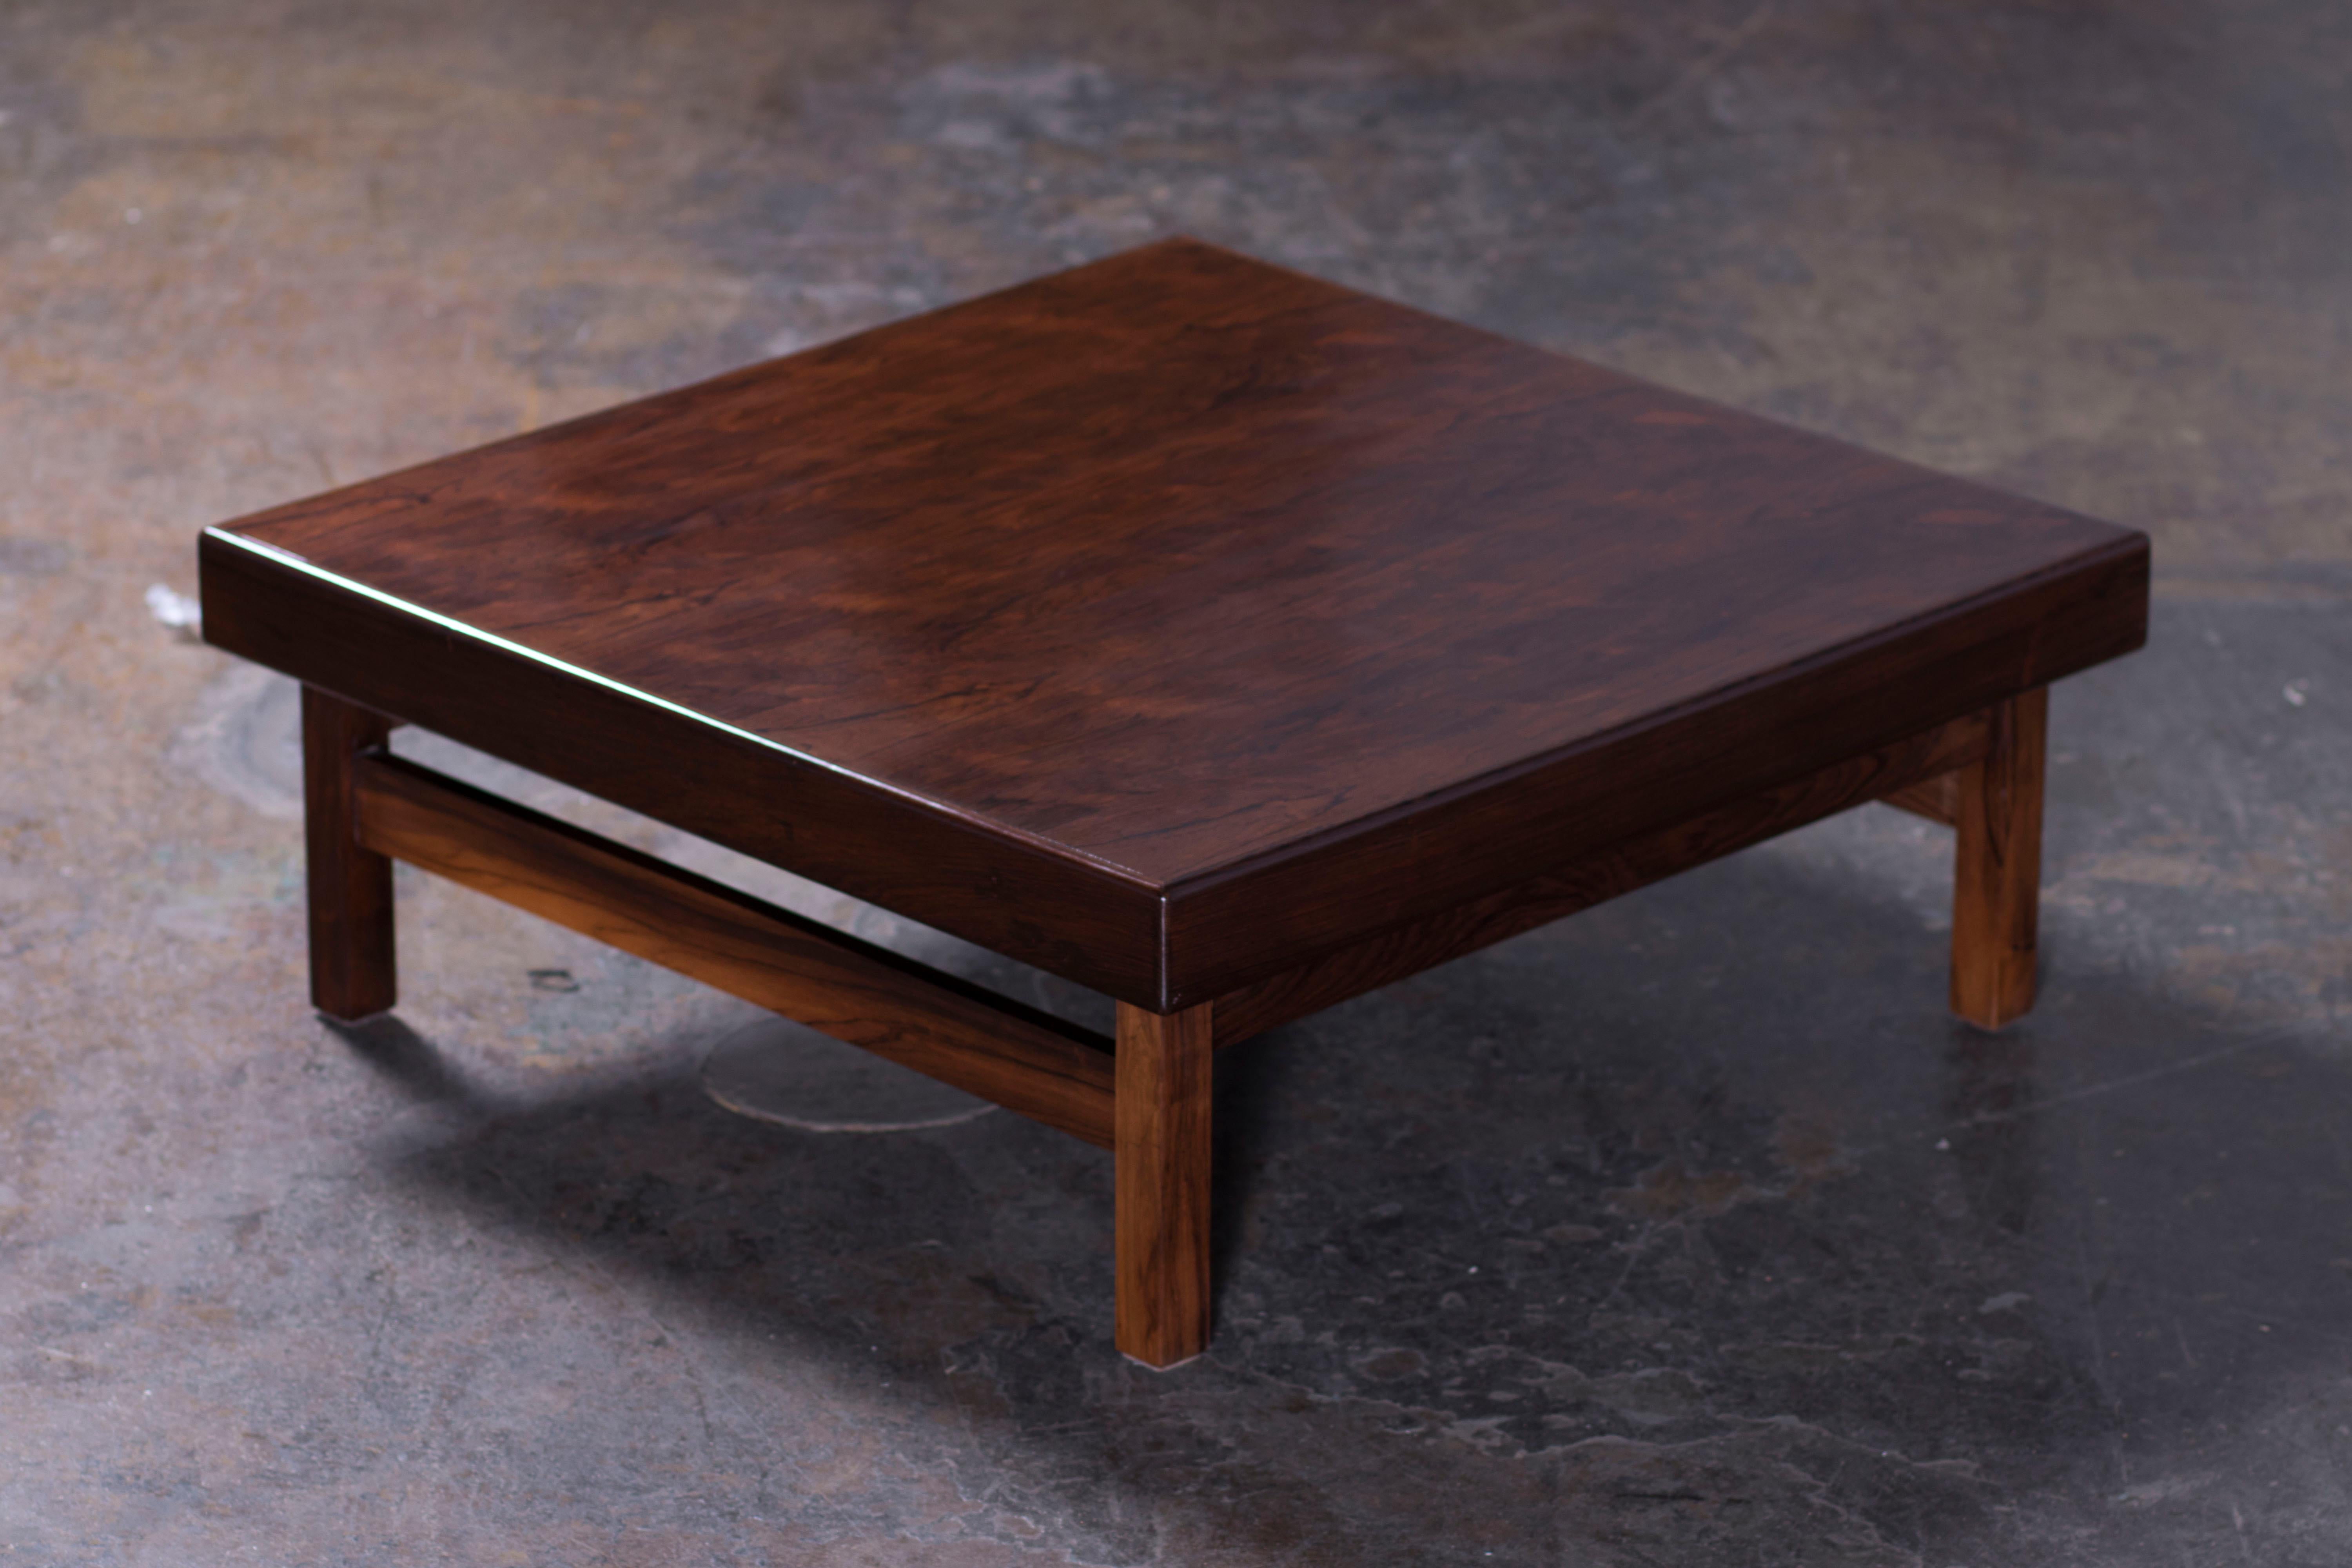 Designed by Sergio Rodrigues, “Vianna” is a square-shaped coffee table made of rosewood. The base is a four leg piece produced by OCA for “Casa do Brasil” in Rome, home of the Brazilian embassy in Italy. This low table was assigned to the